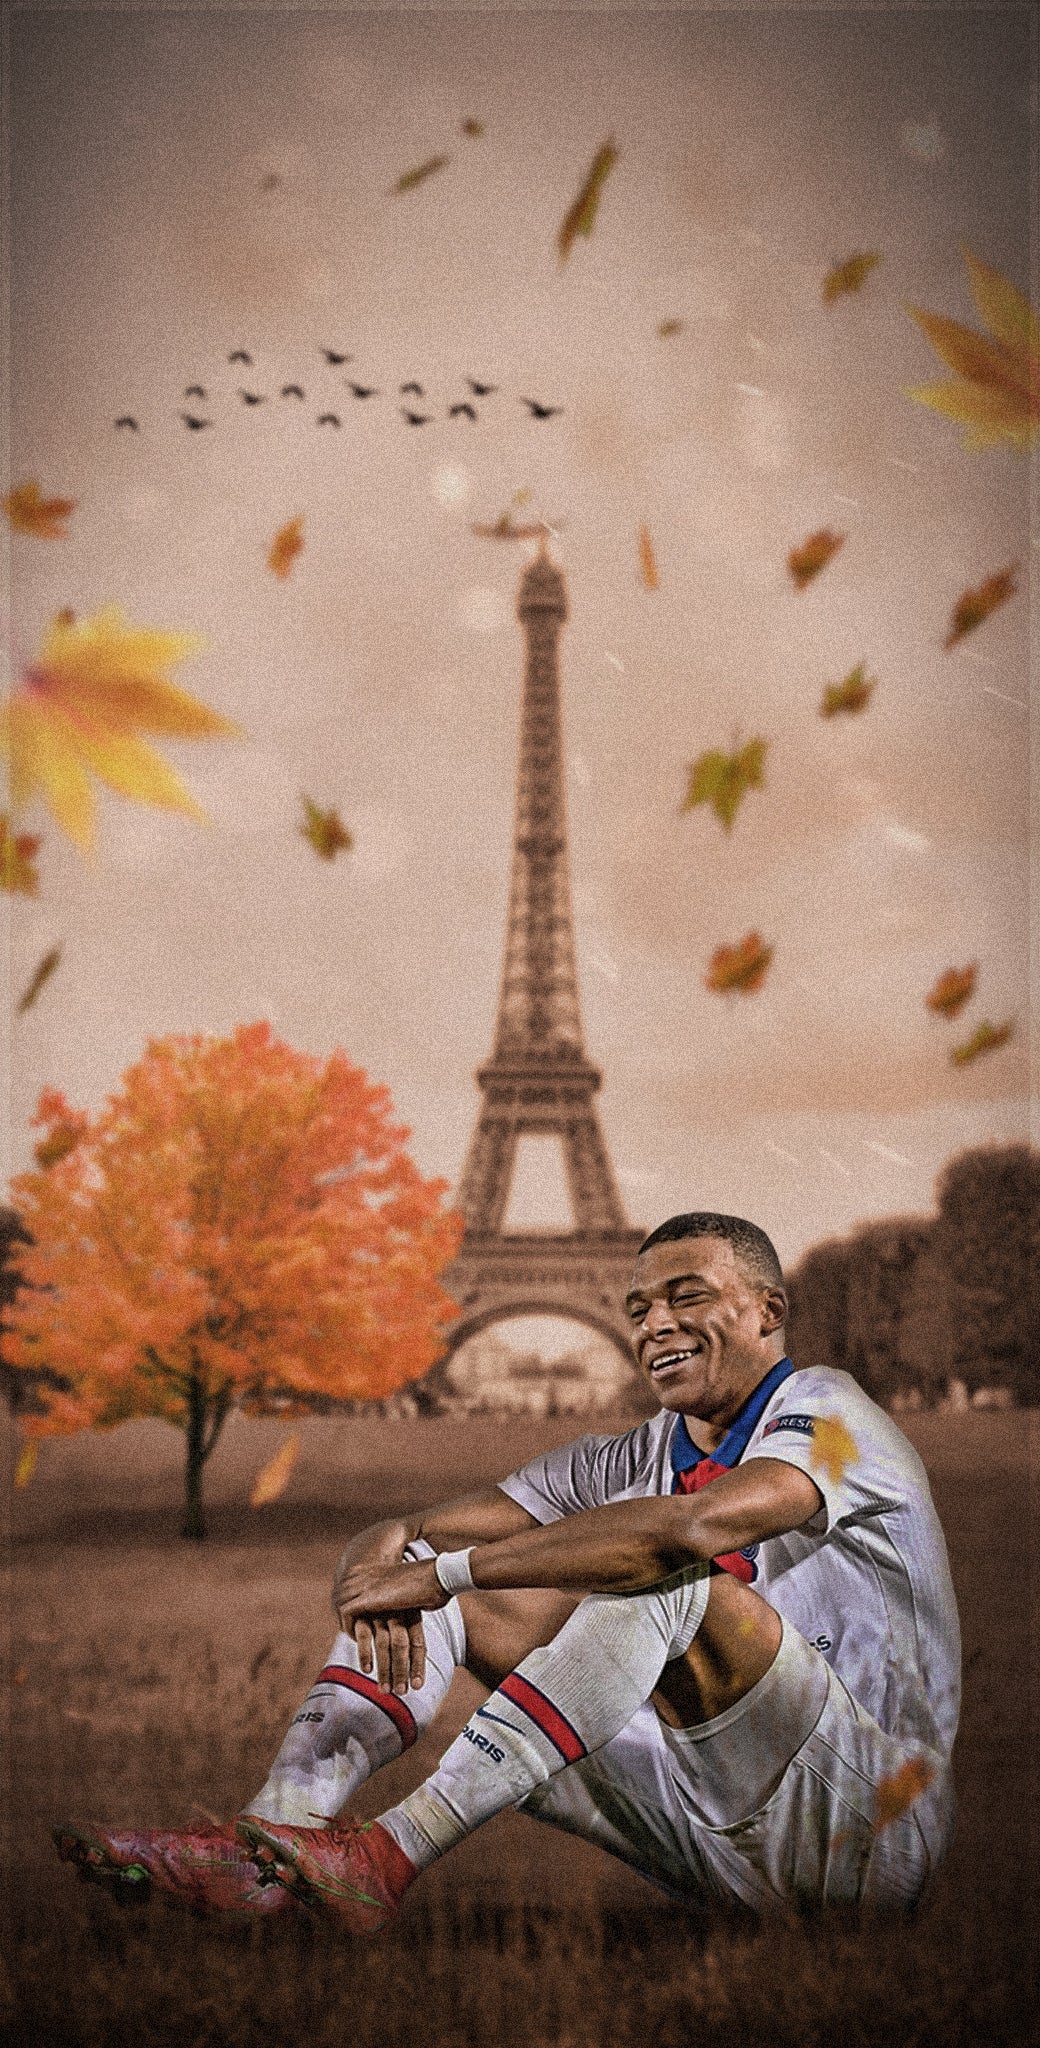 Mbappe wallpaper that I have made